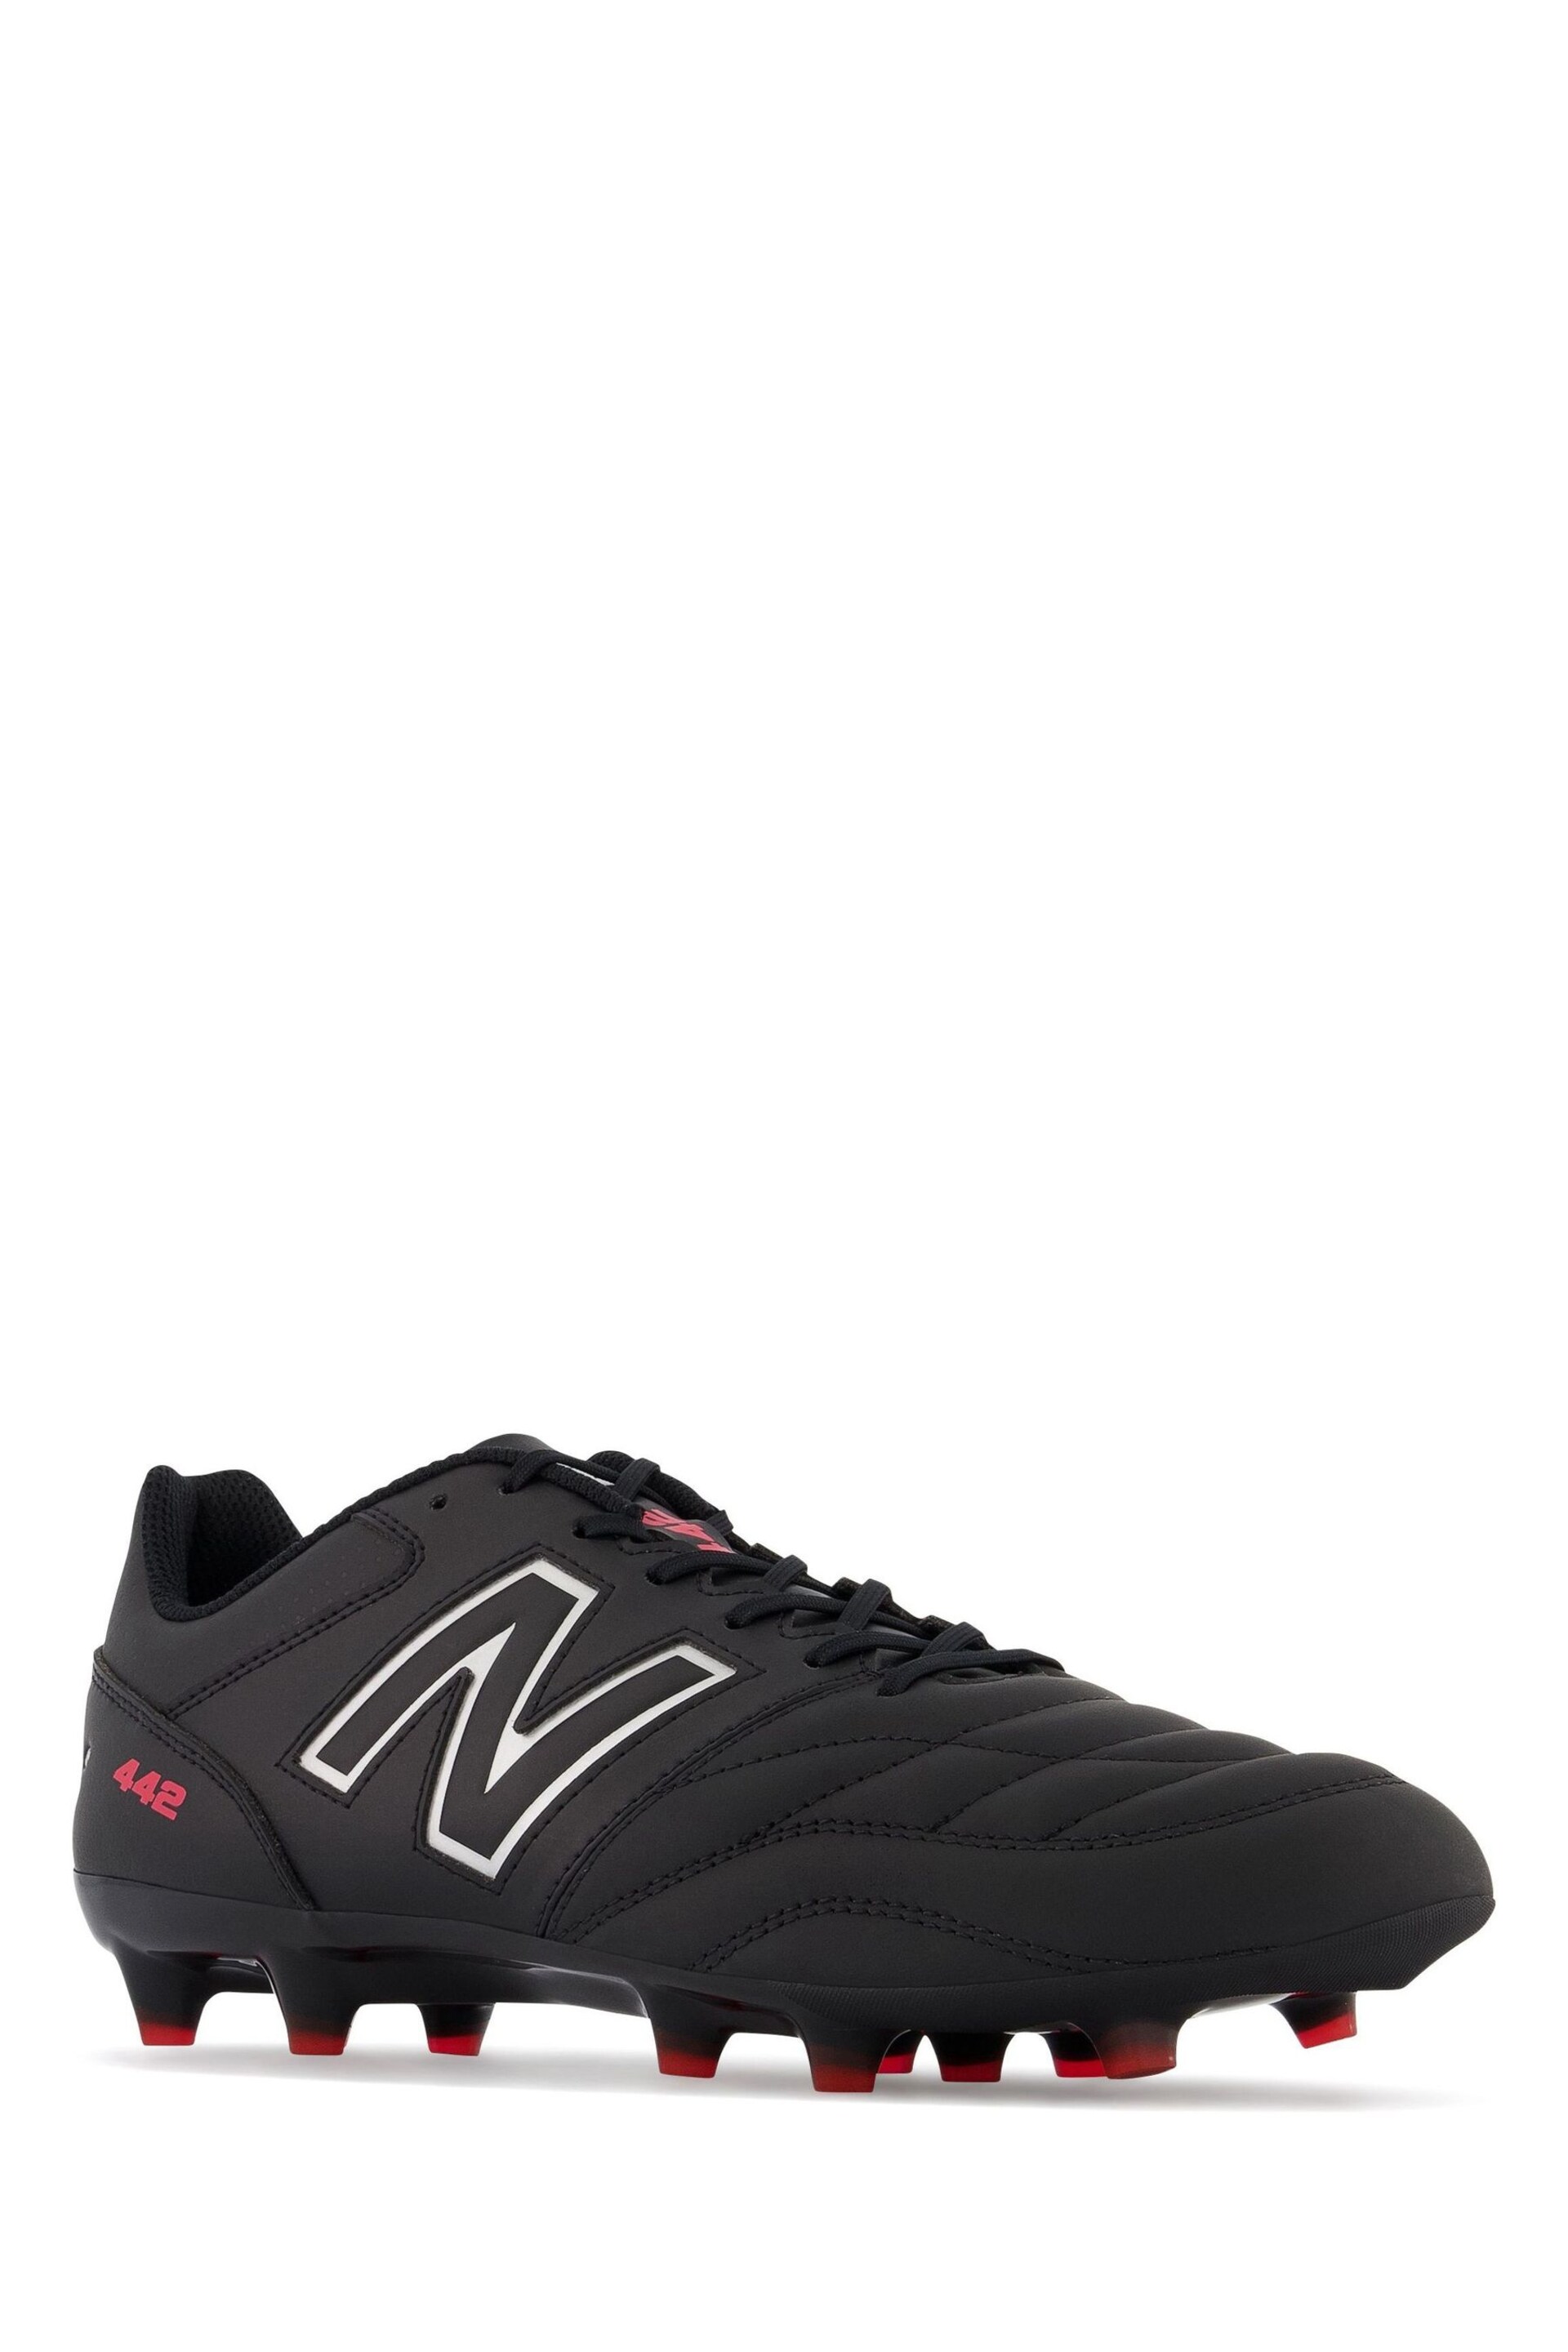 New Balance Black Mens 442 Firm Football Boots - Image 3 of 6